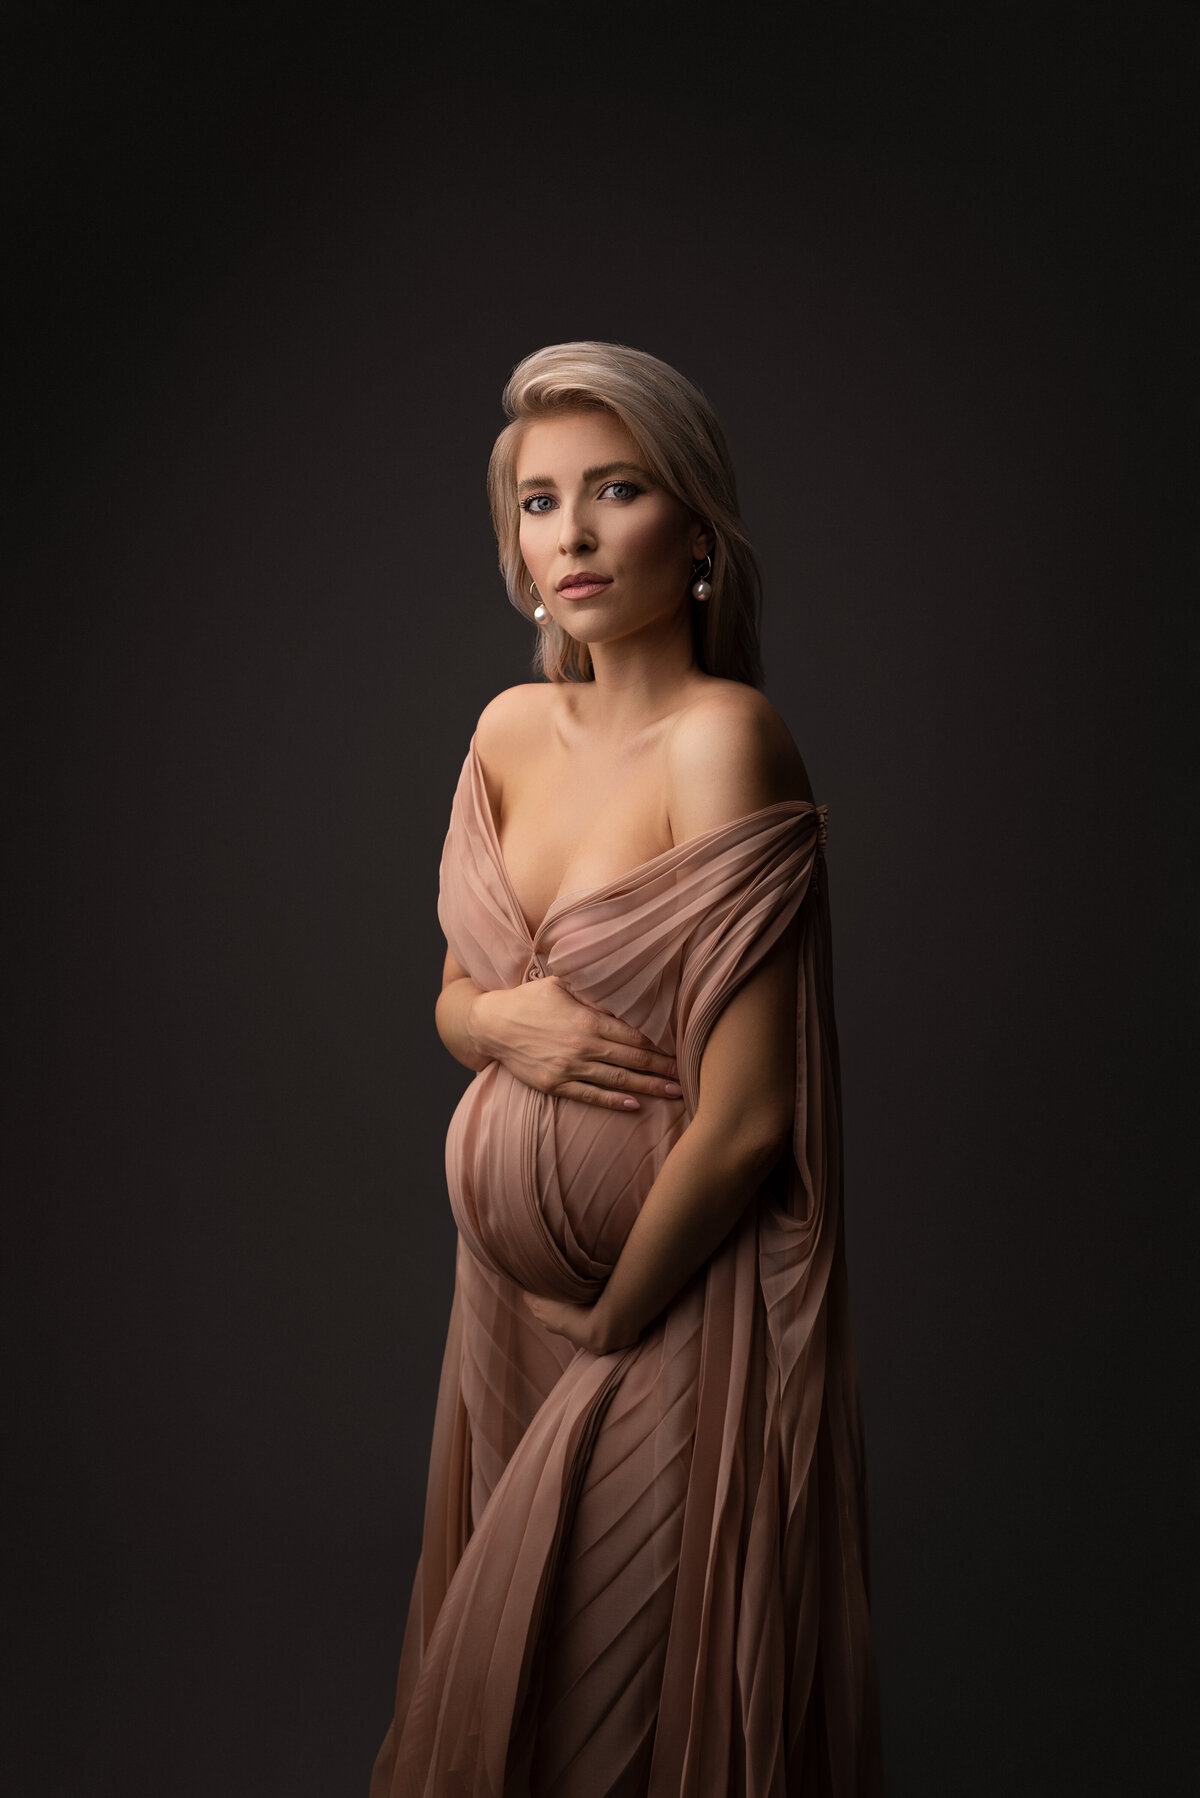 Woman poses for fine art maternity photos with top Philadelphia Main Line maternity photographer Katie Marshall. The woman is standing angled to the camera in a long, off-the-shoulder dusty rose gown with floor-length caped sleeves. One and is atop of her baby bump, the other is under. She is looking over her shoulder toward the camera with an intent gaze.